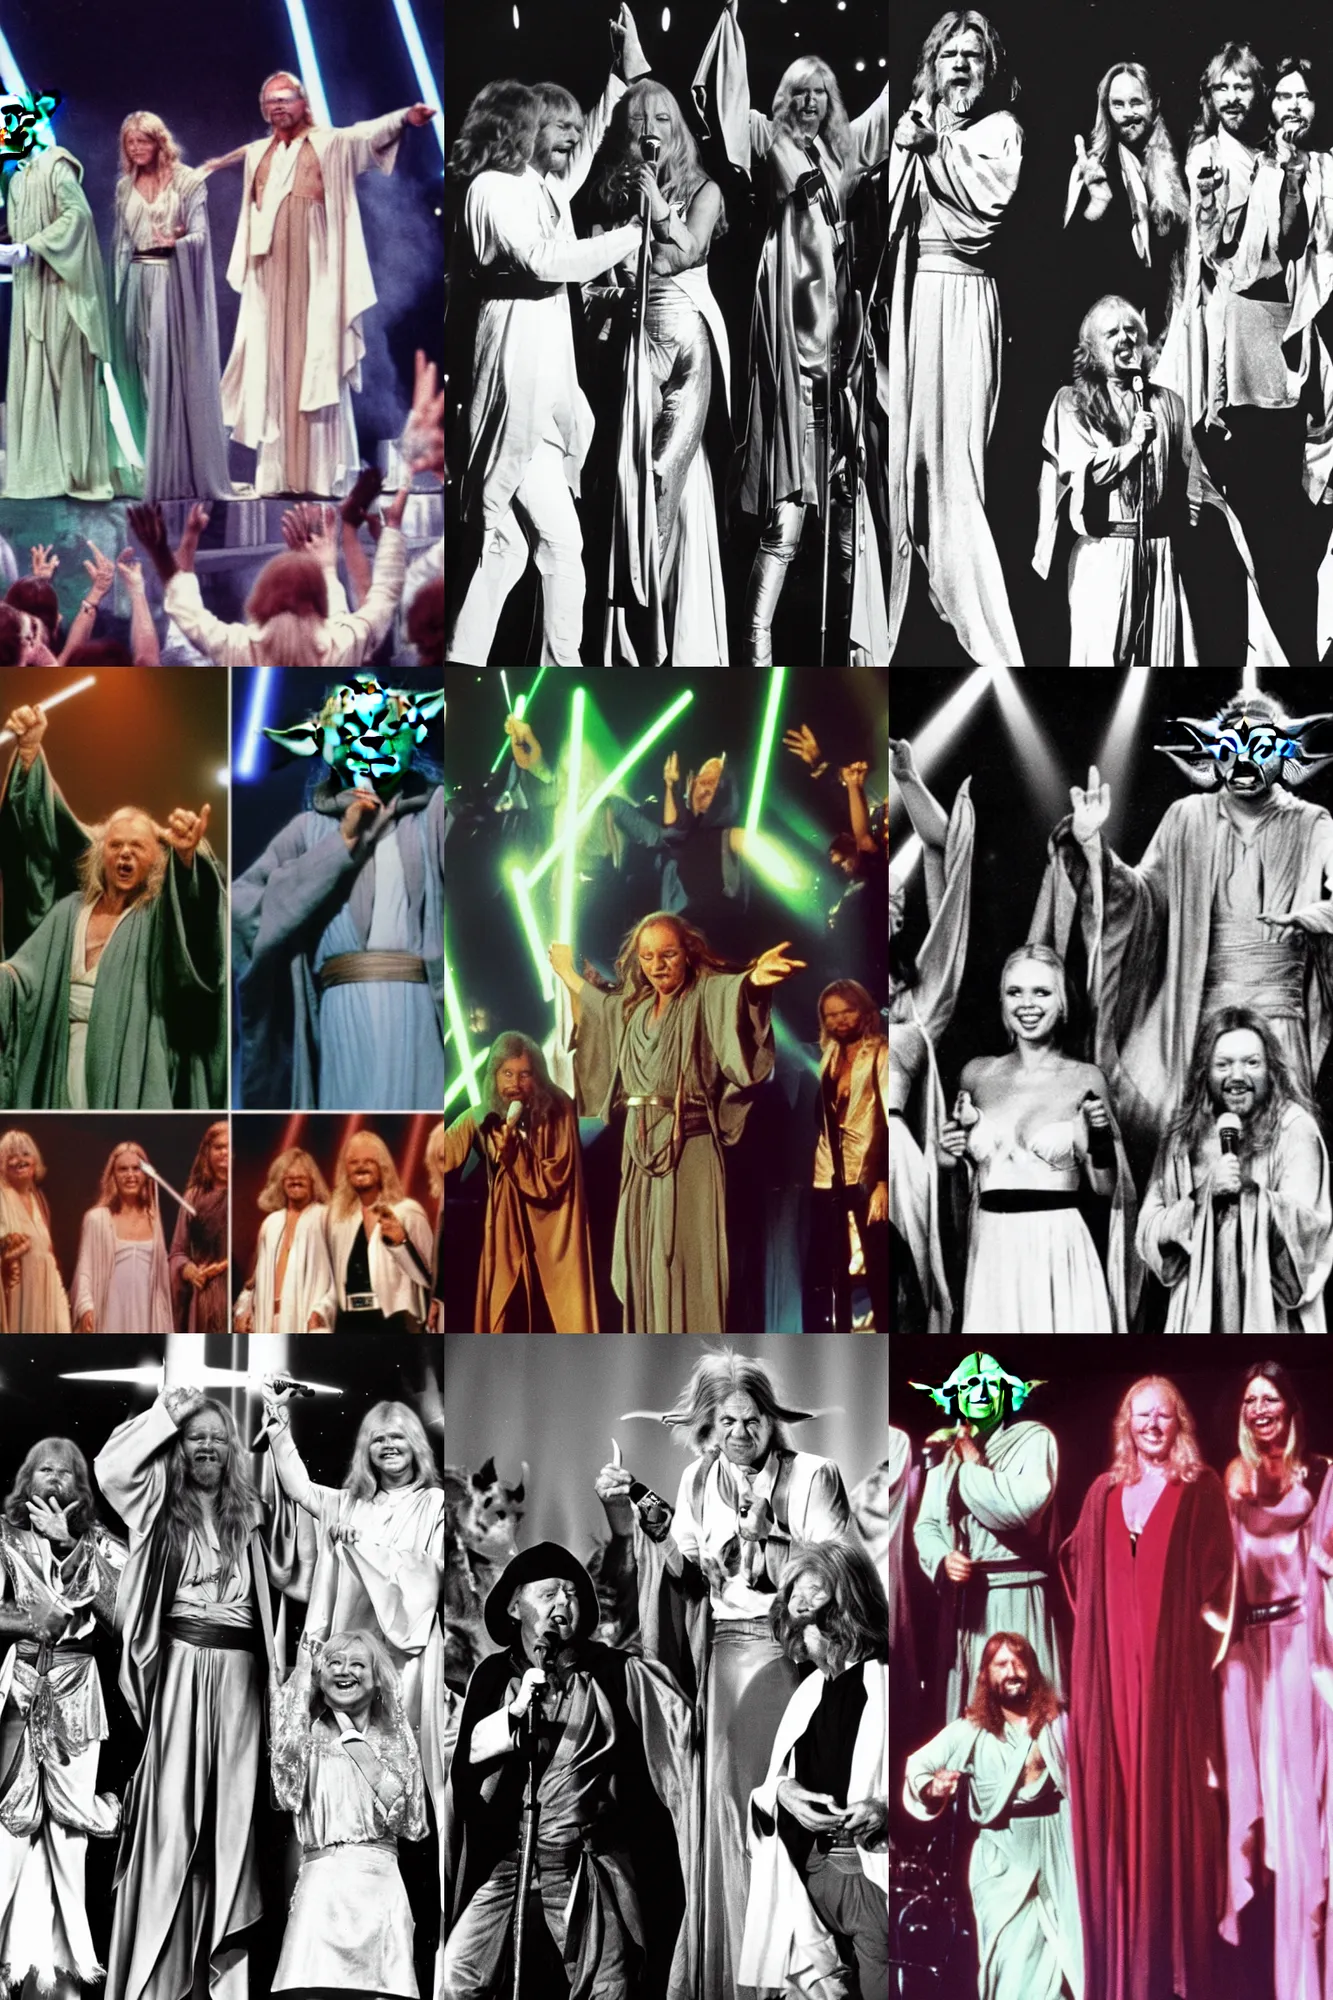 Prompt: photo of jedi master yoda winning eurovision song contest and celebrating with abba on stage in the 70s